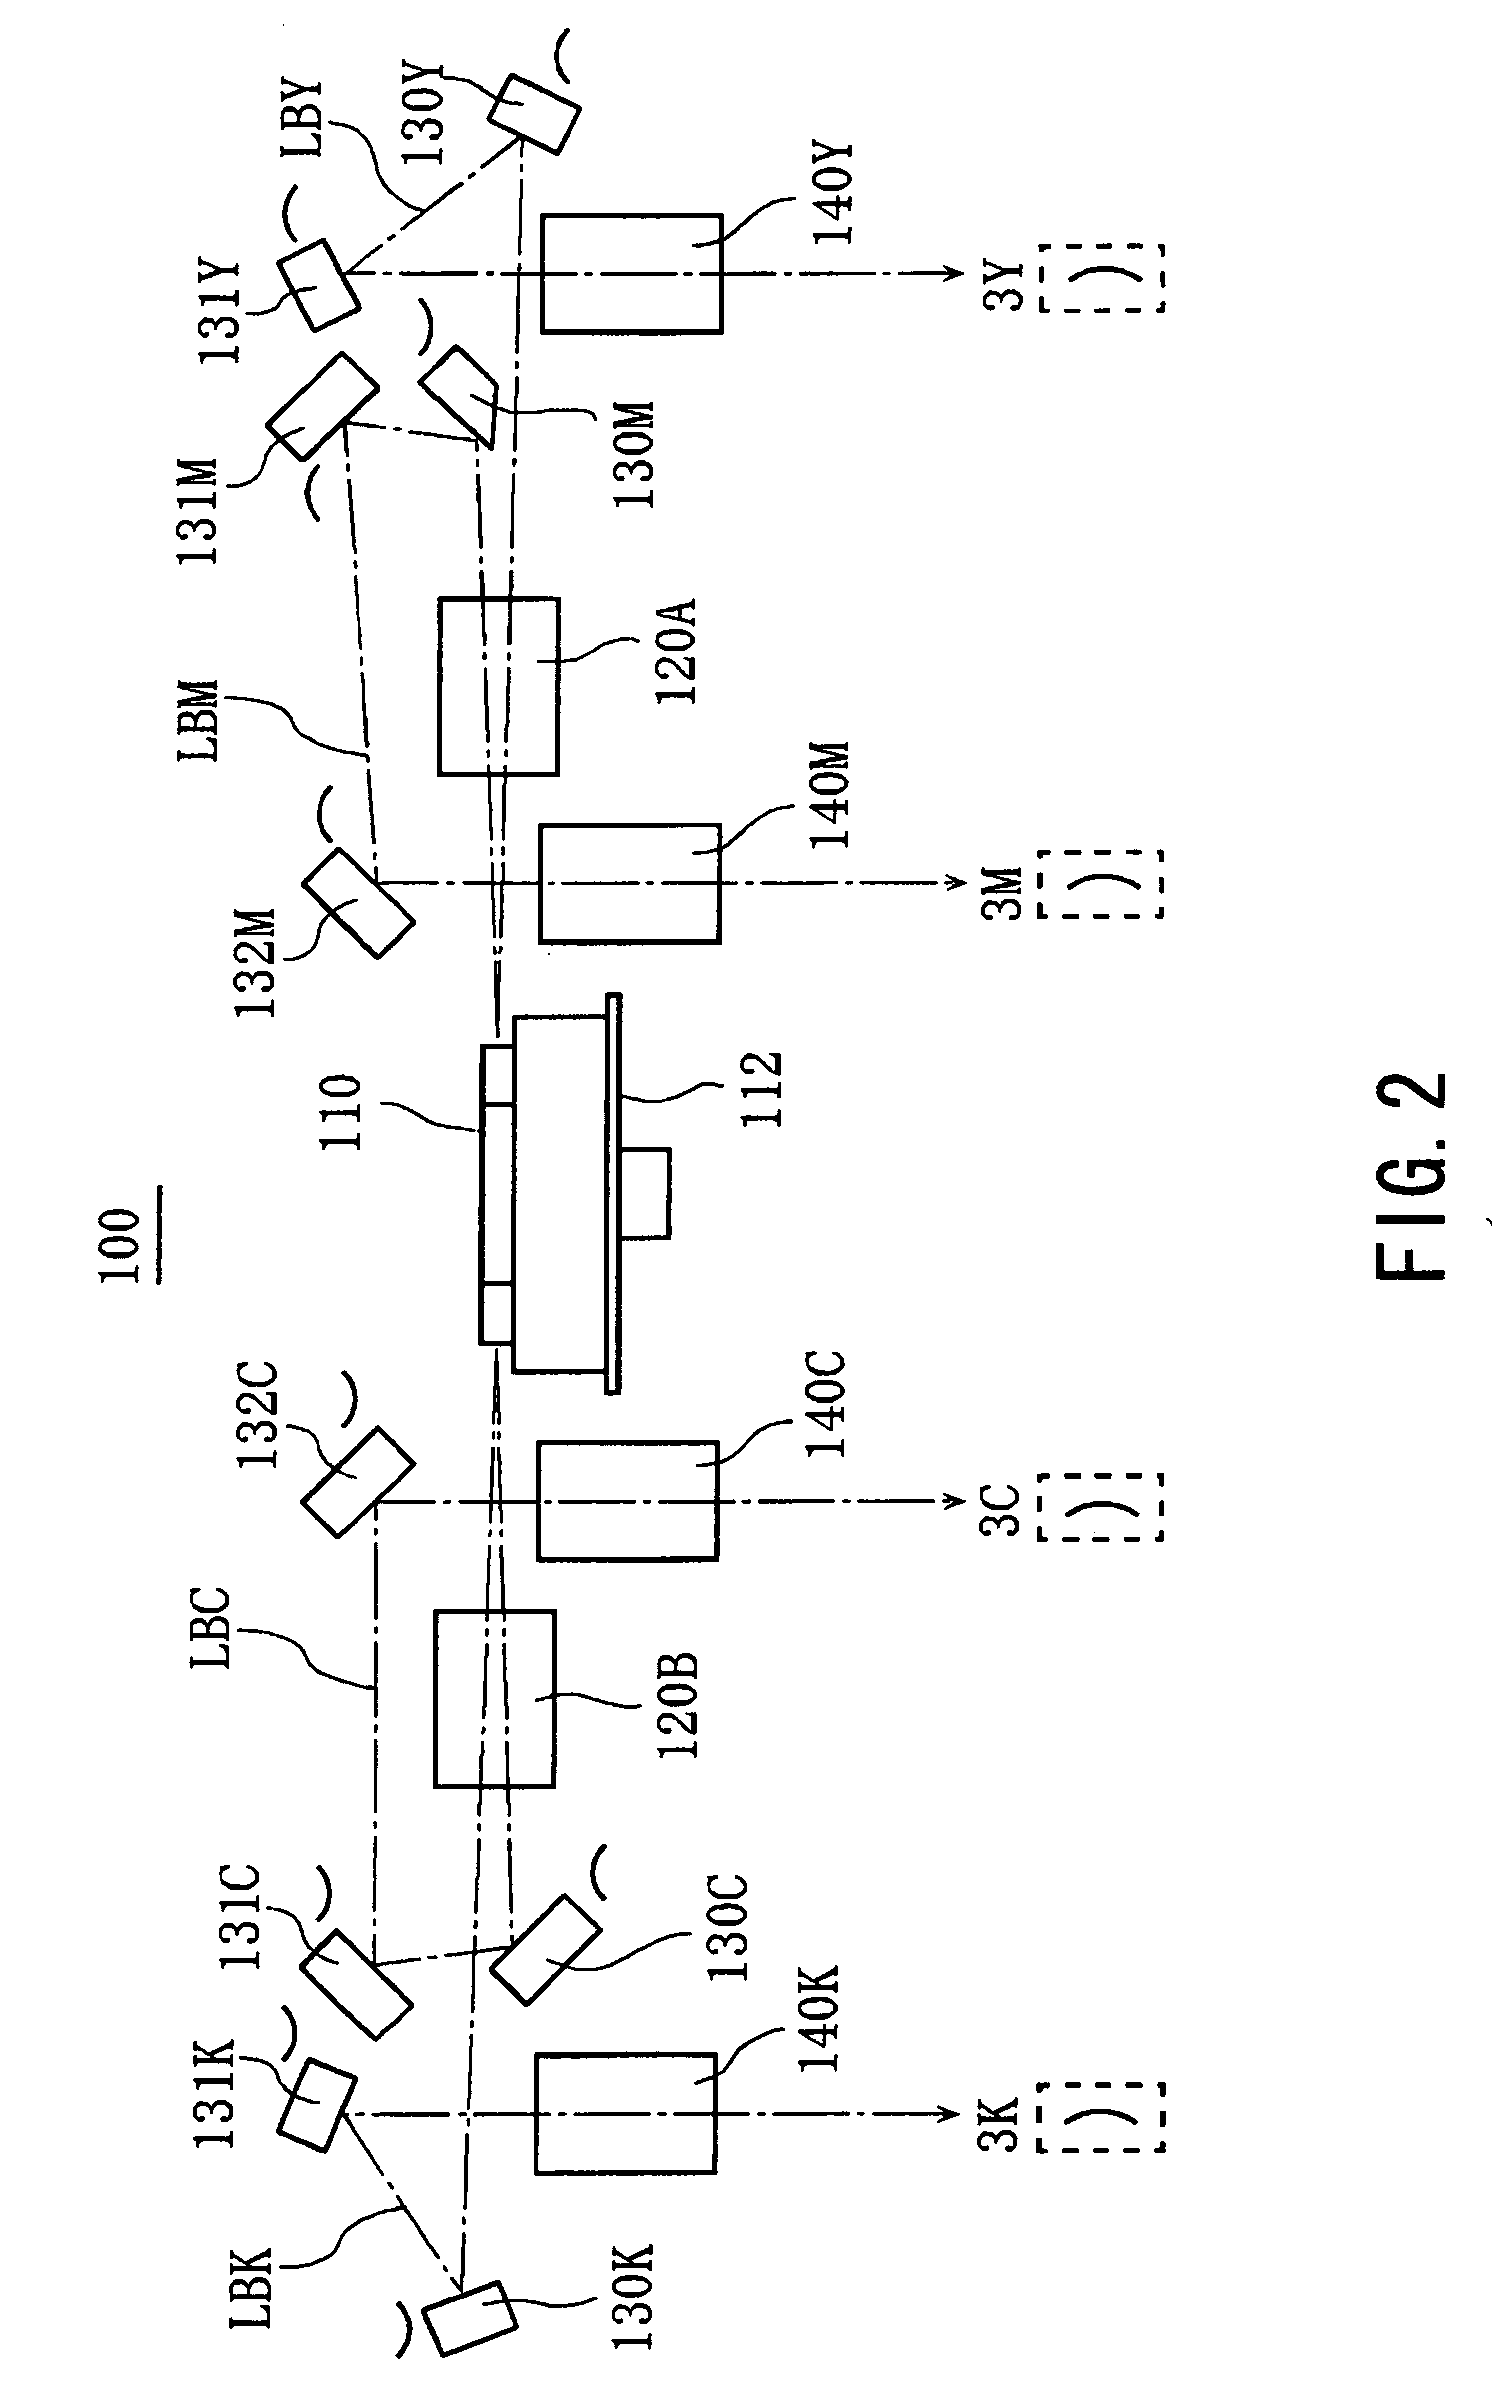 Image-forming device and scanning unit for use therein